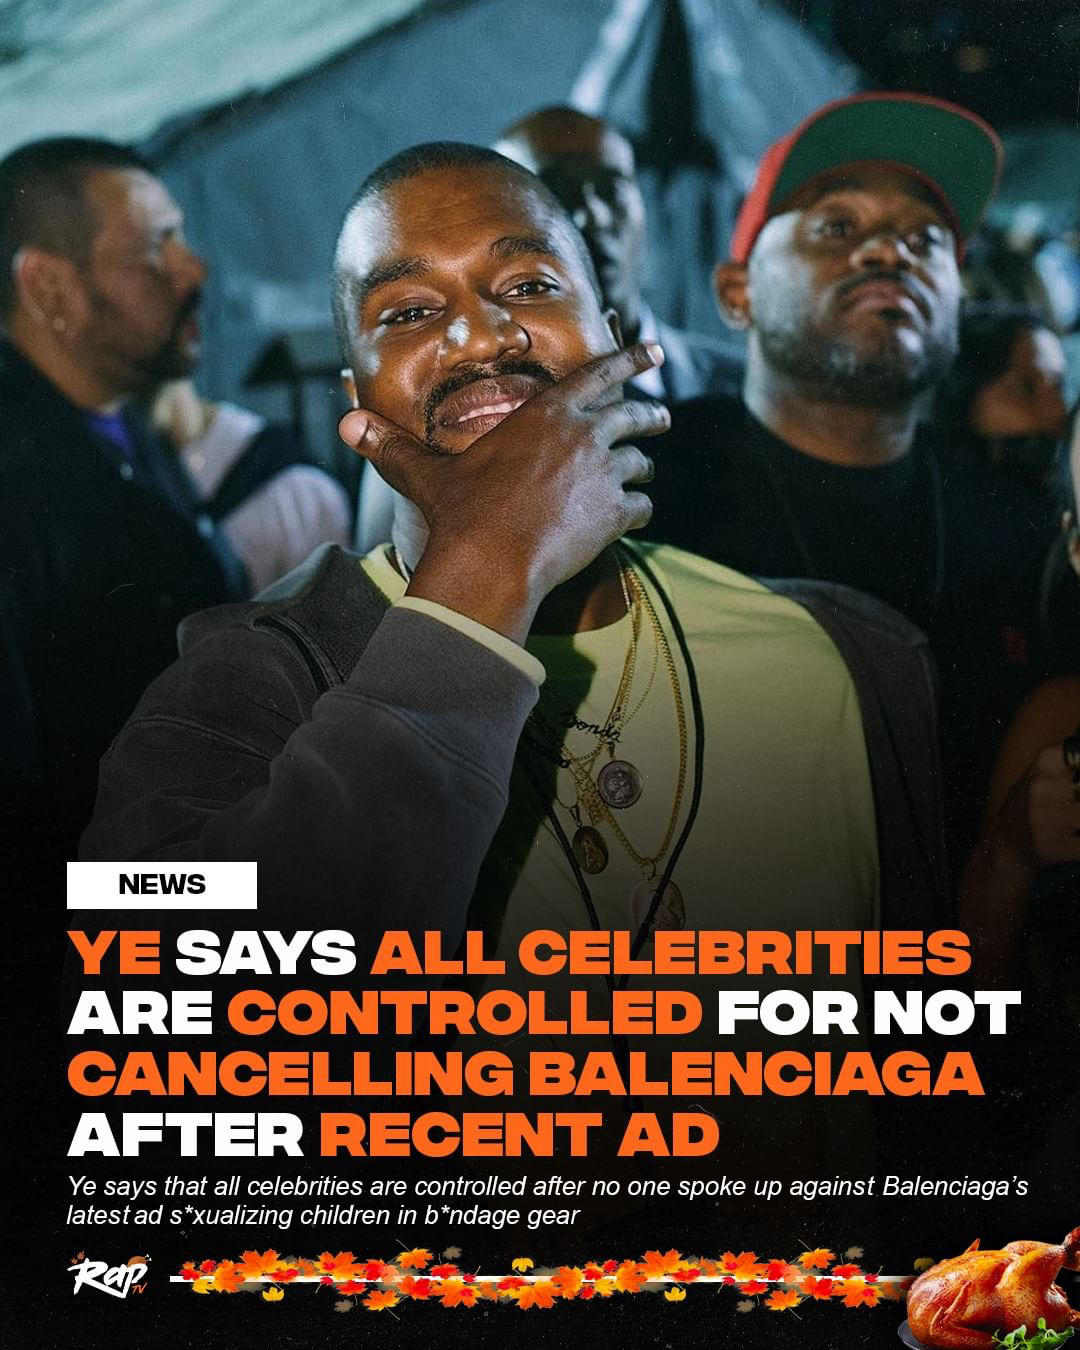 image  1 RapTV - #Ye said that all celebrities are controlled after no one cancelled #Balenciaga for their